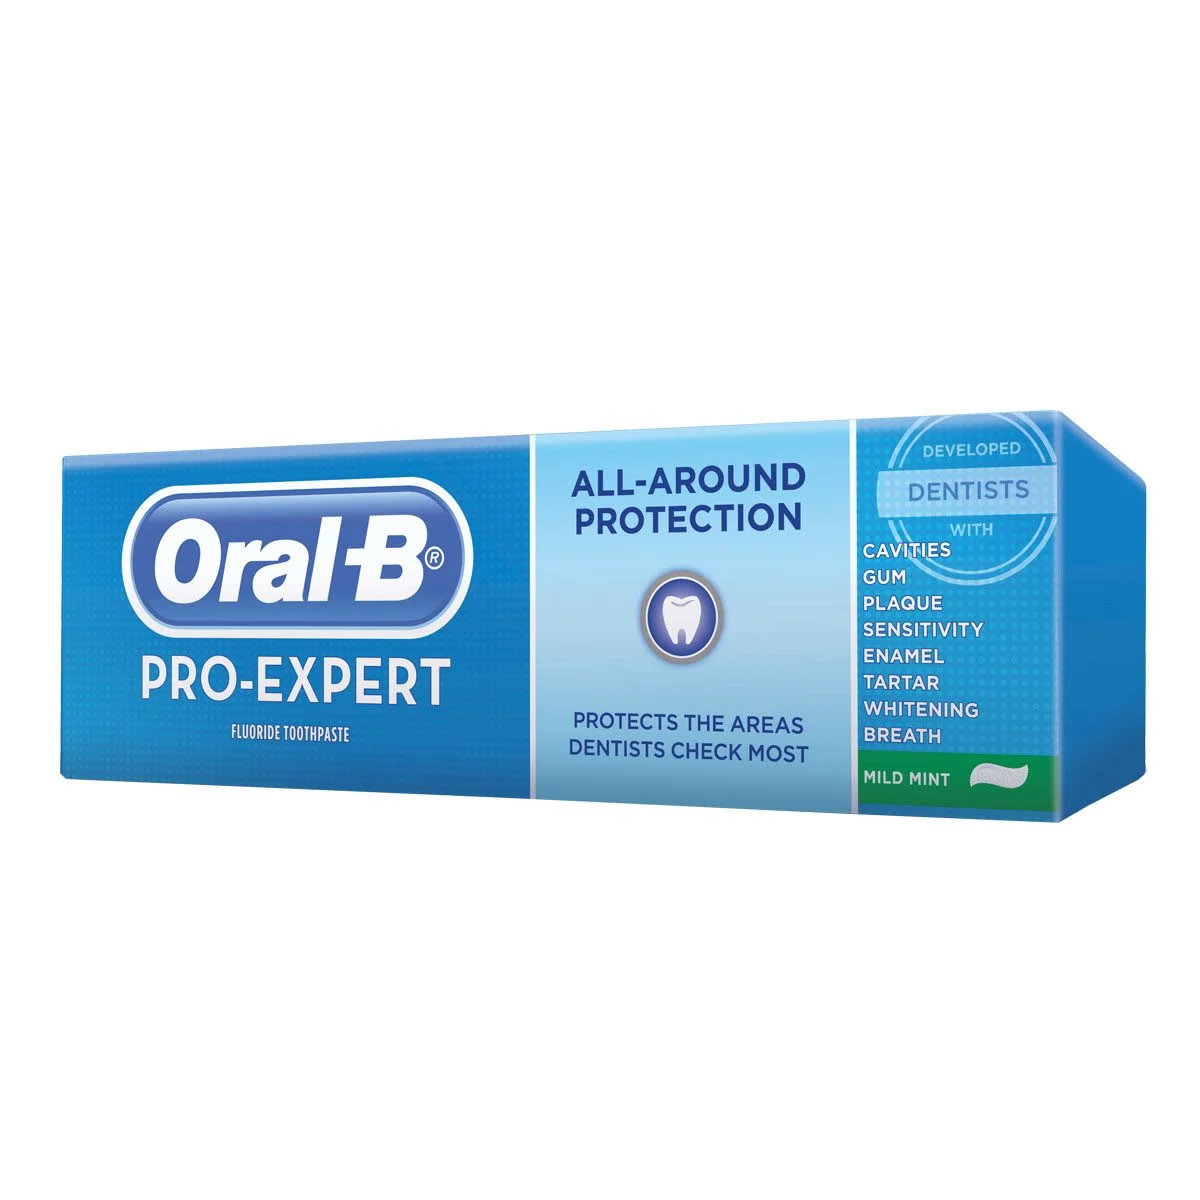 Oral-B Pro-Expert All-Around Protection Mild Mint toothpaste 